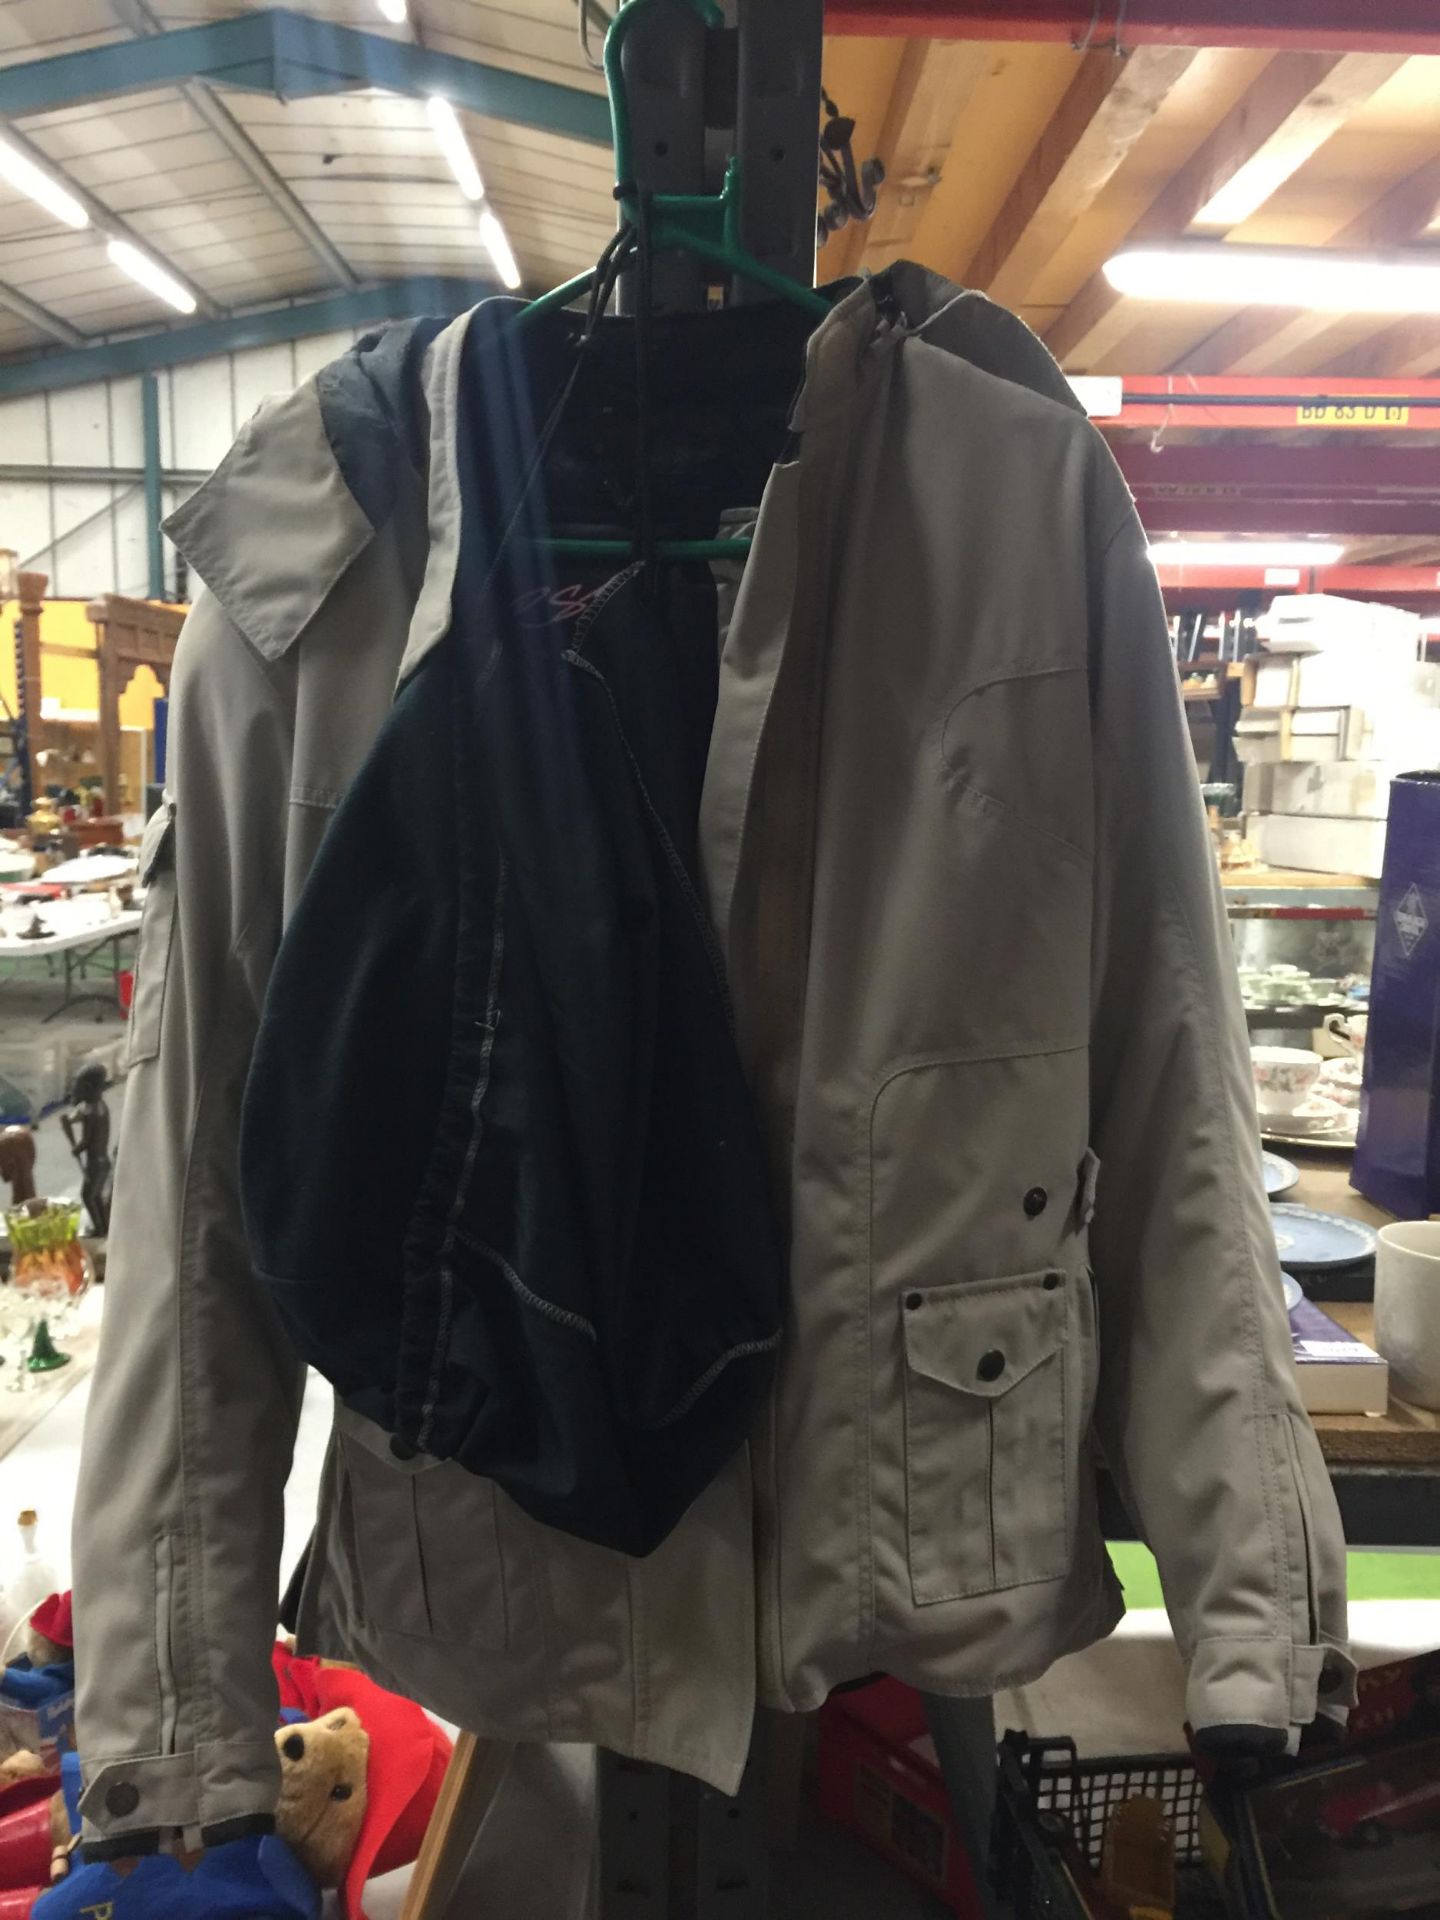 A PADDED MOTORCYCLE JACKET